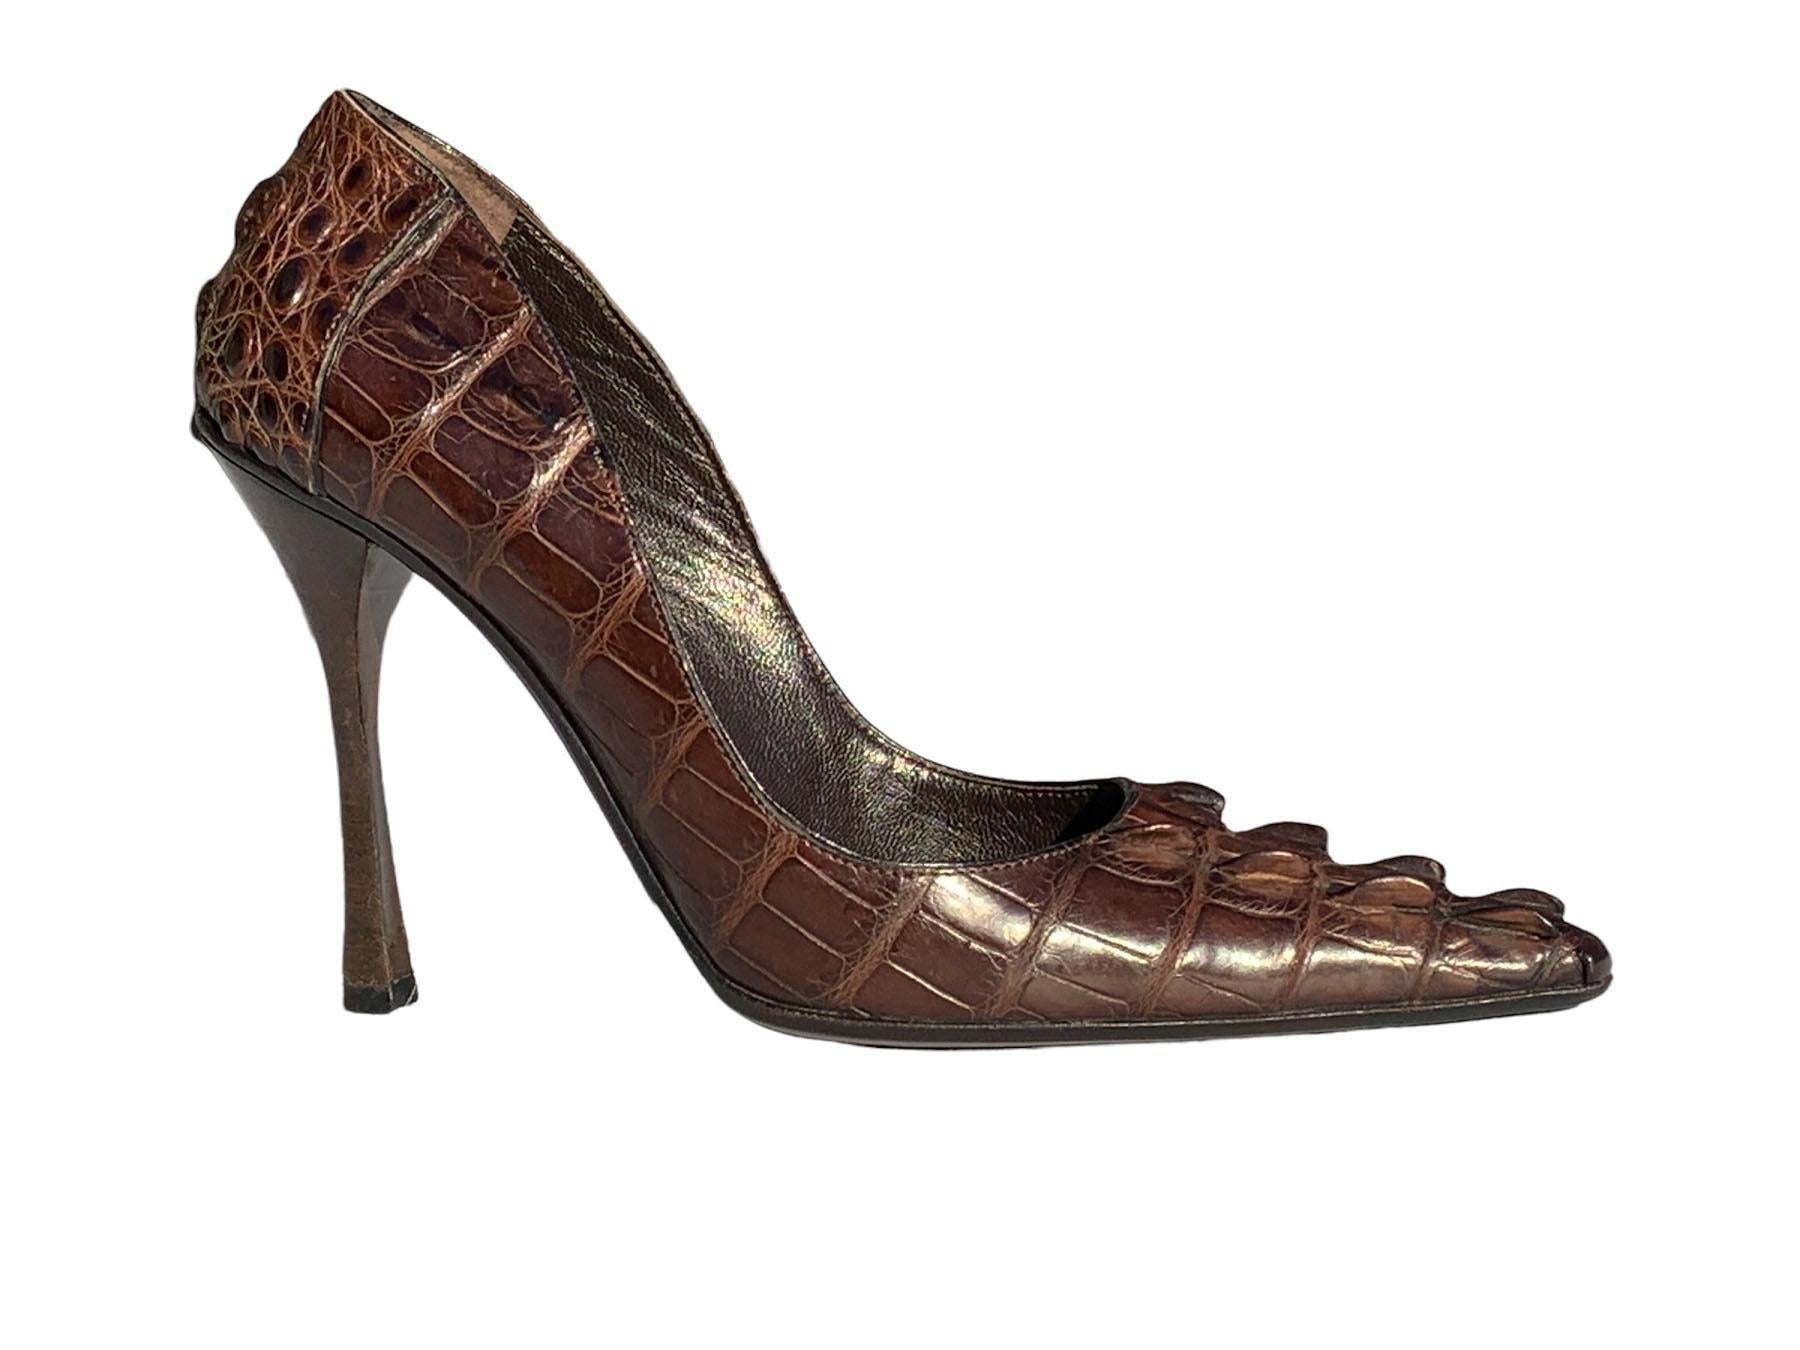 Tom Ford for Gucci Brown  Crocodile Heels Pumps
Designer size - 10 B ( Italian 40 )
F/W 2002 Collection
Genuine crocodile skin, Leather sole & insole, Stacked heels height - 4.5 inches
Made in Italy.
Excellent condition.
Crocodile large size brown